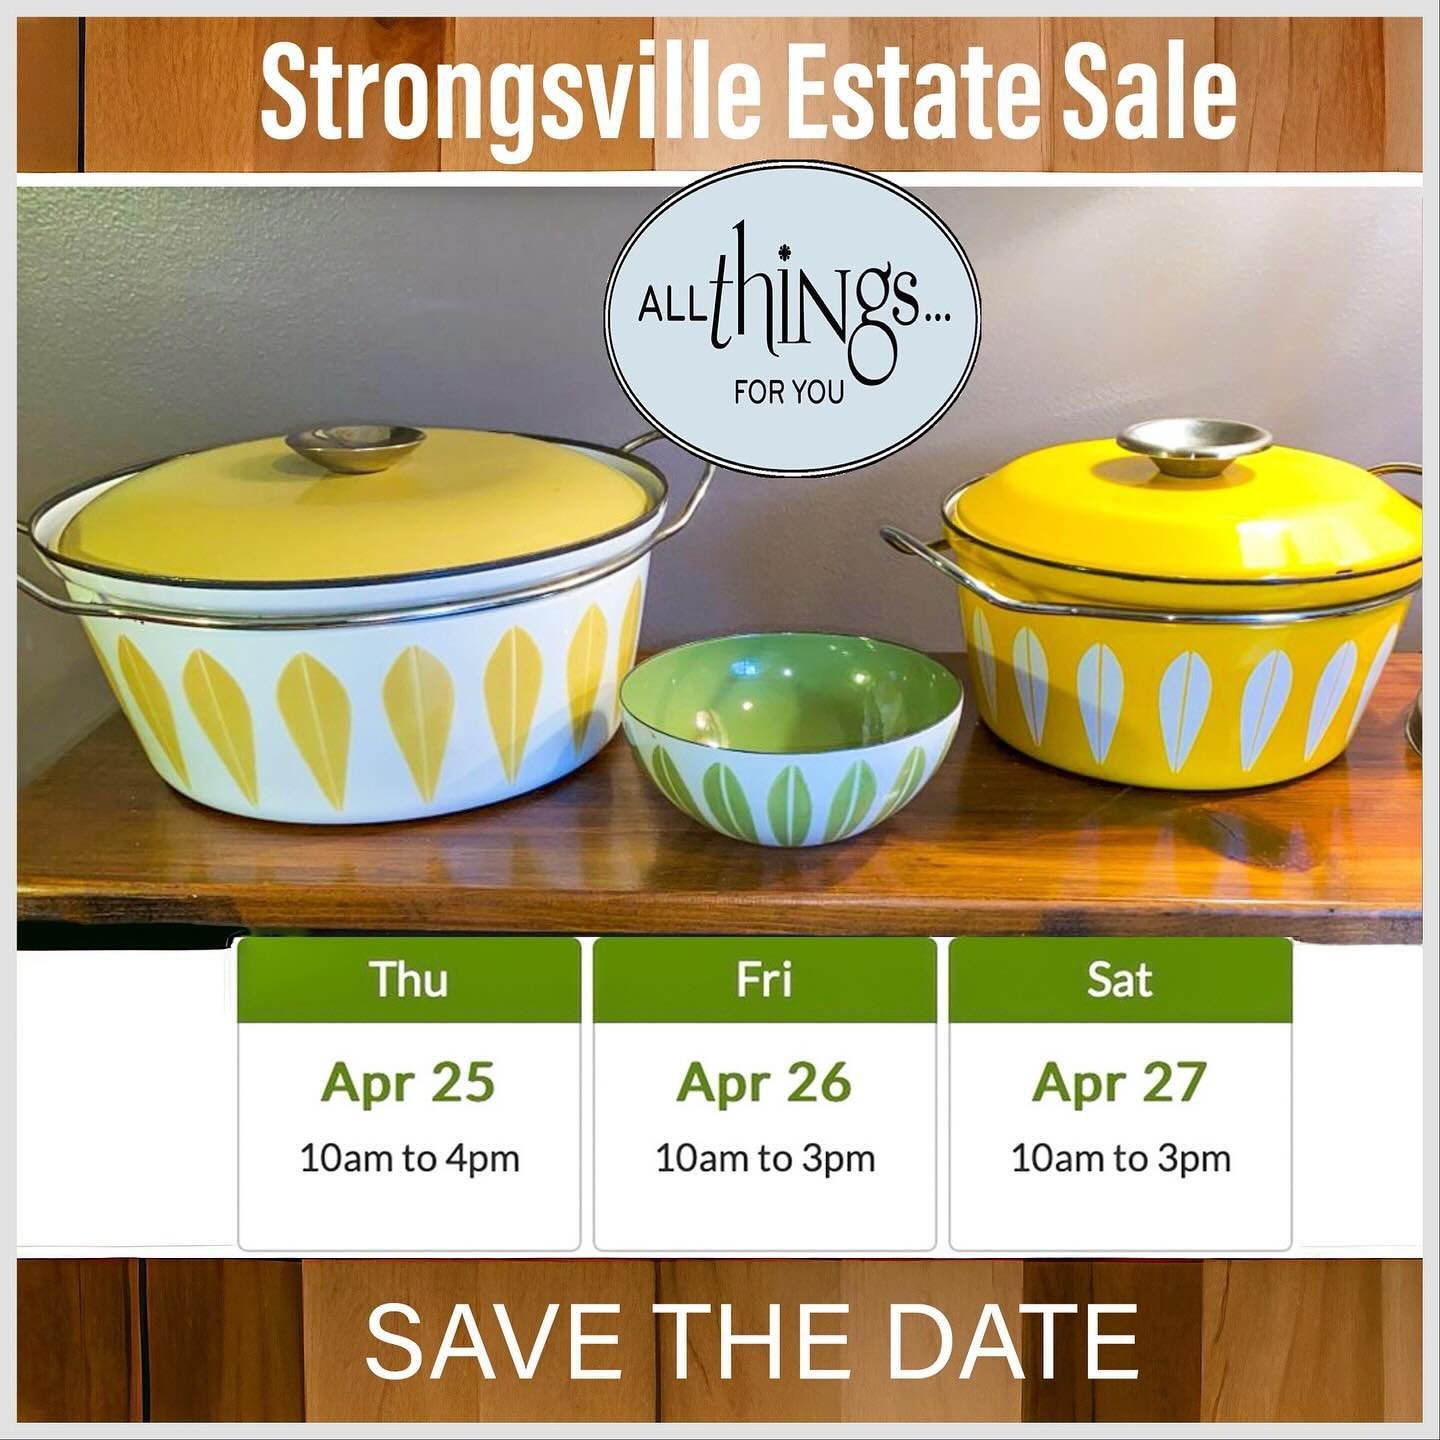 Our next All Things For You estate sale starts 4/25-4/27/24 in Strongsville 44149. SAVE THE DAY for this fun All Things For You estate sale. 
Check out the web address below for more details and photos on this estate sales.
https://www.estatesales.ne